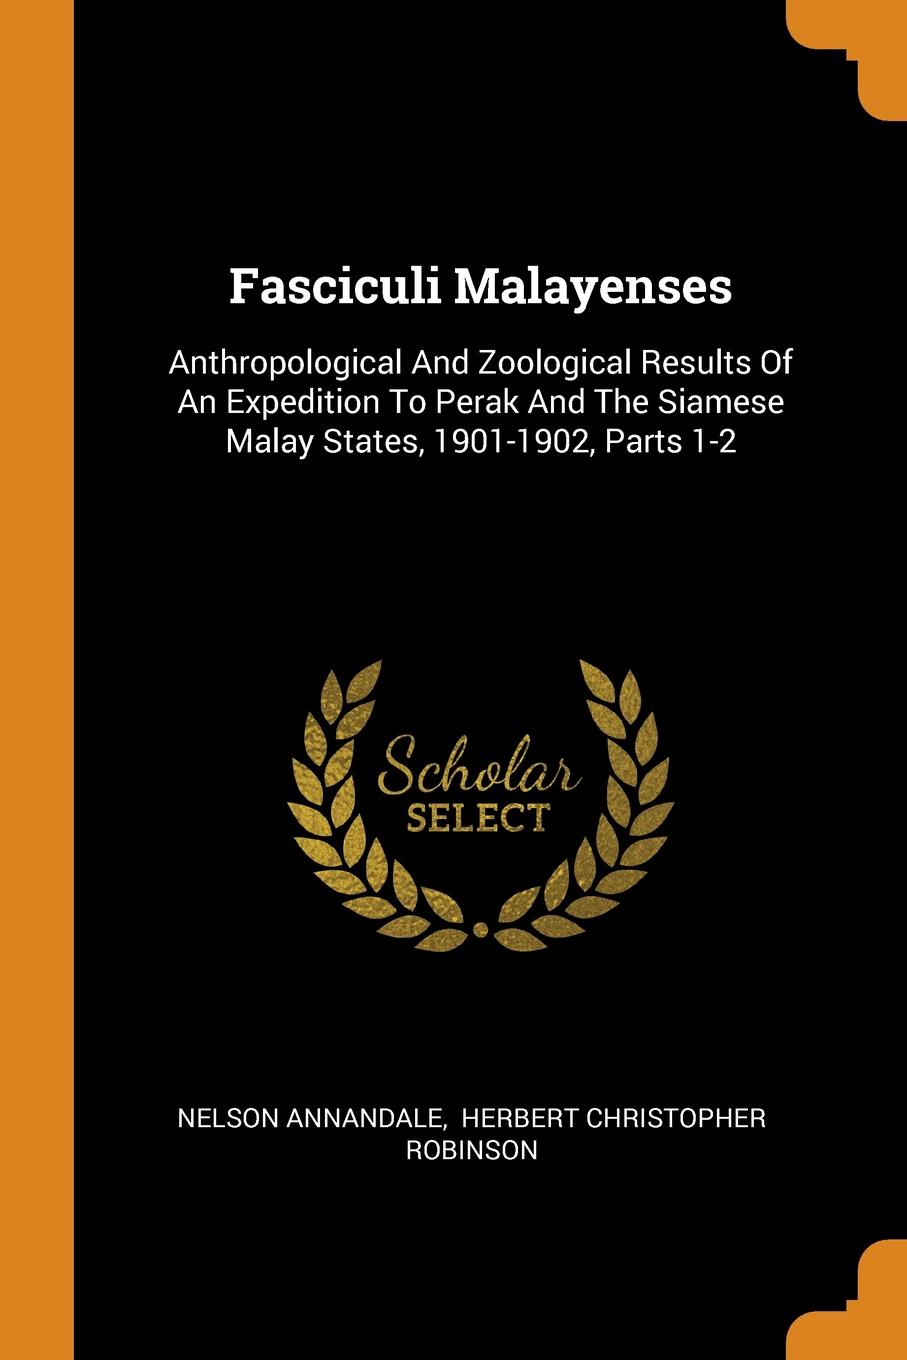 Fasciculi Malayenses. Anthropological And Zoological Results Of An Expedition To Perak And The Siamese Malay States, 1901-1902, Parts 1-2